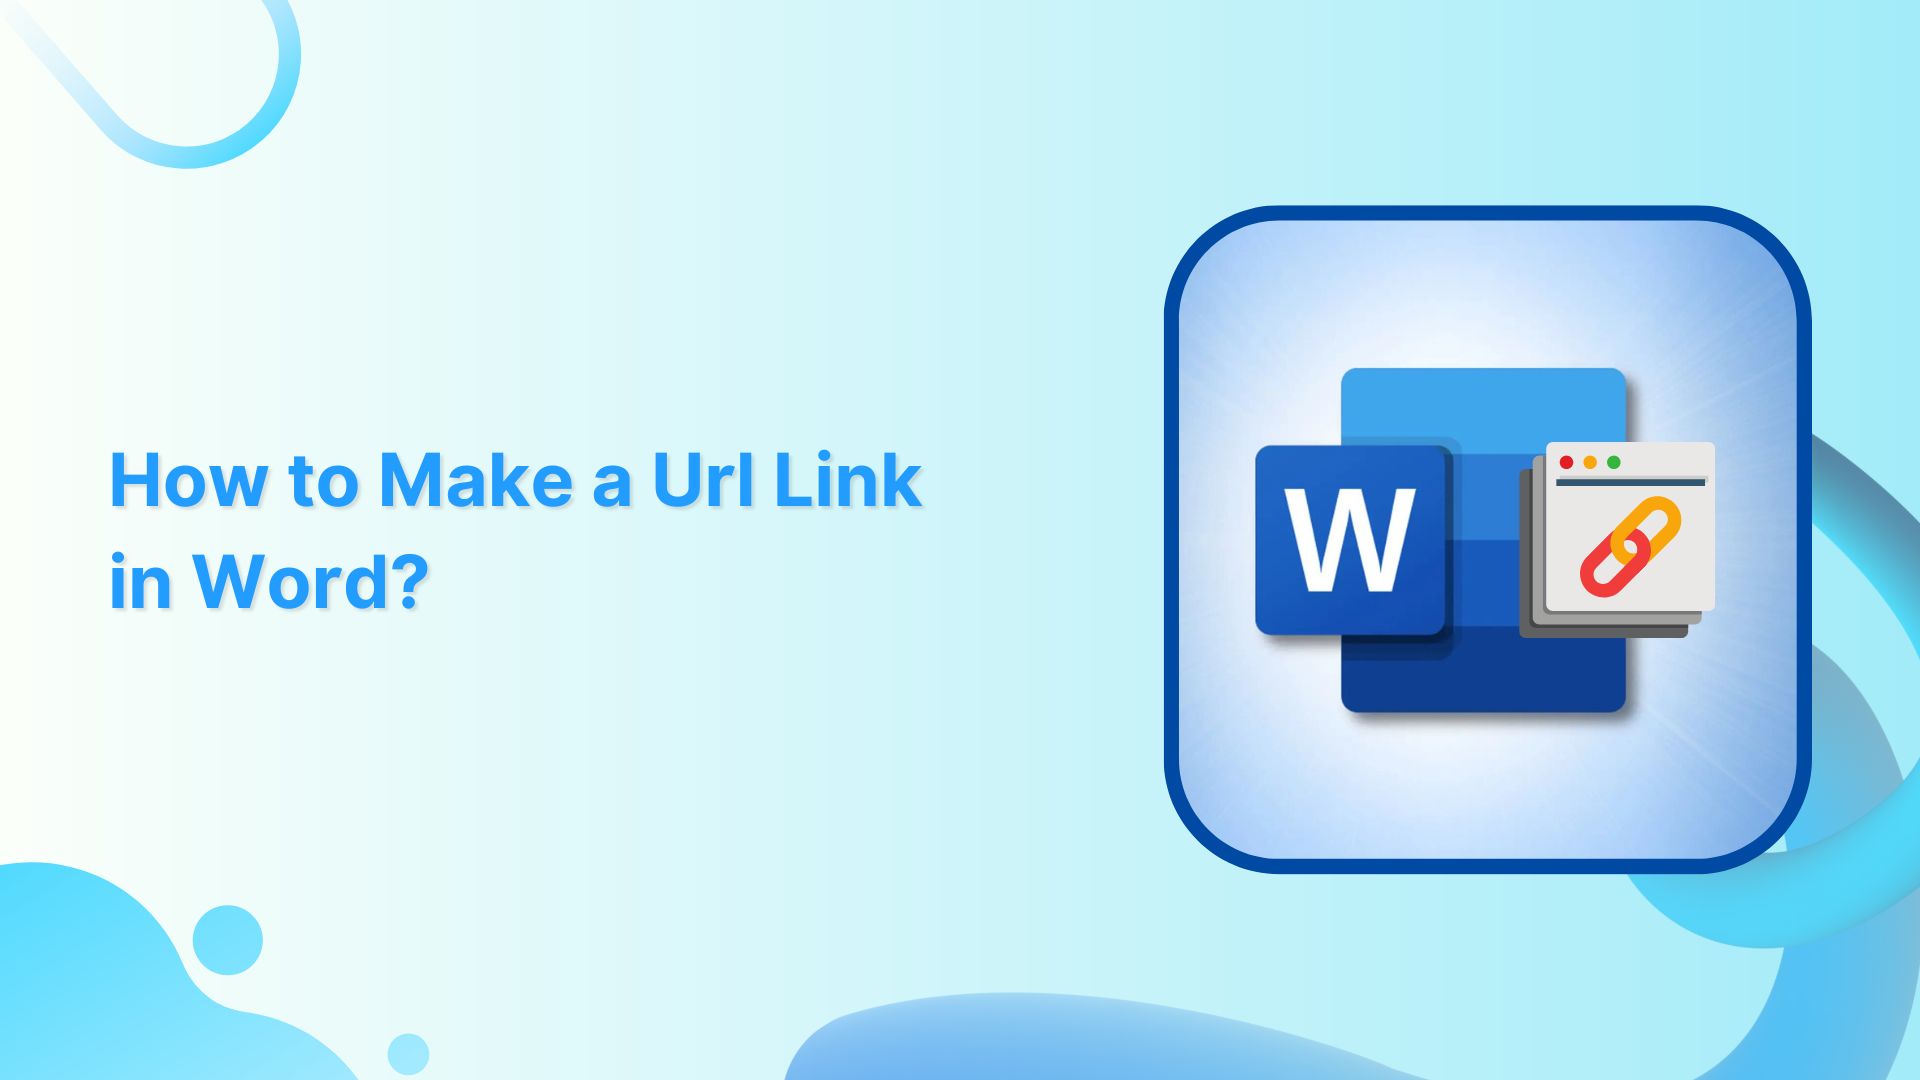 How to Make a Url Link in Word?